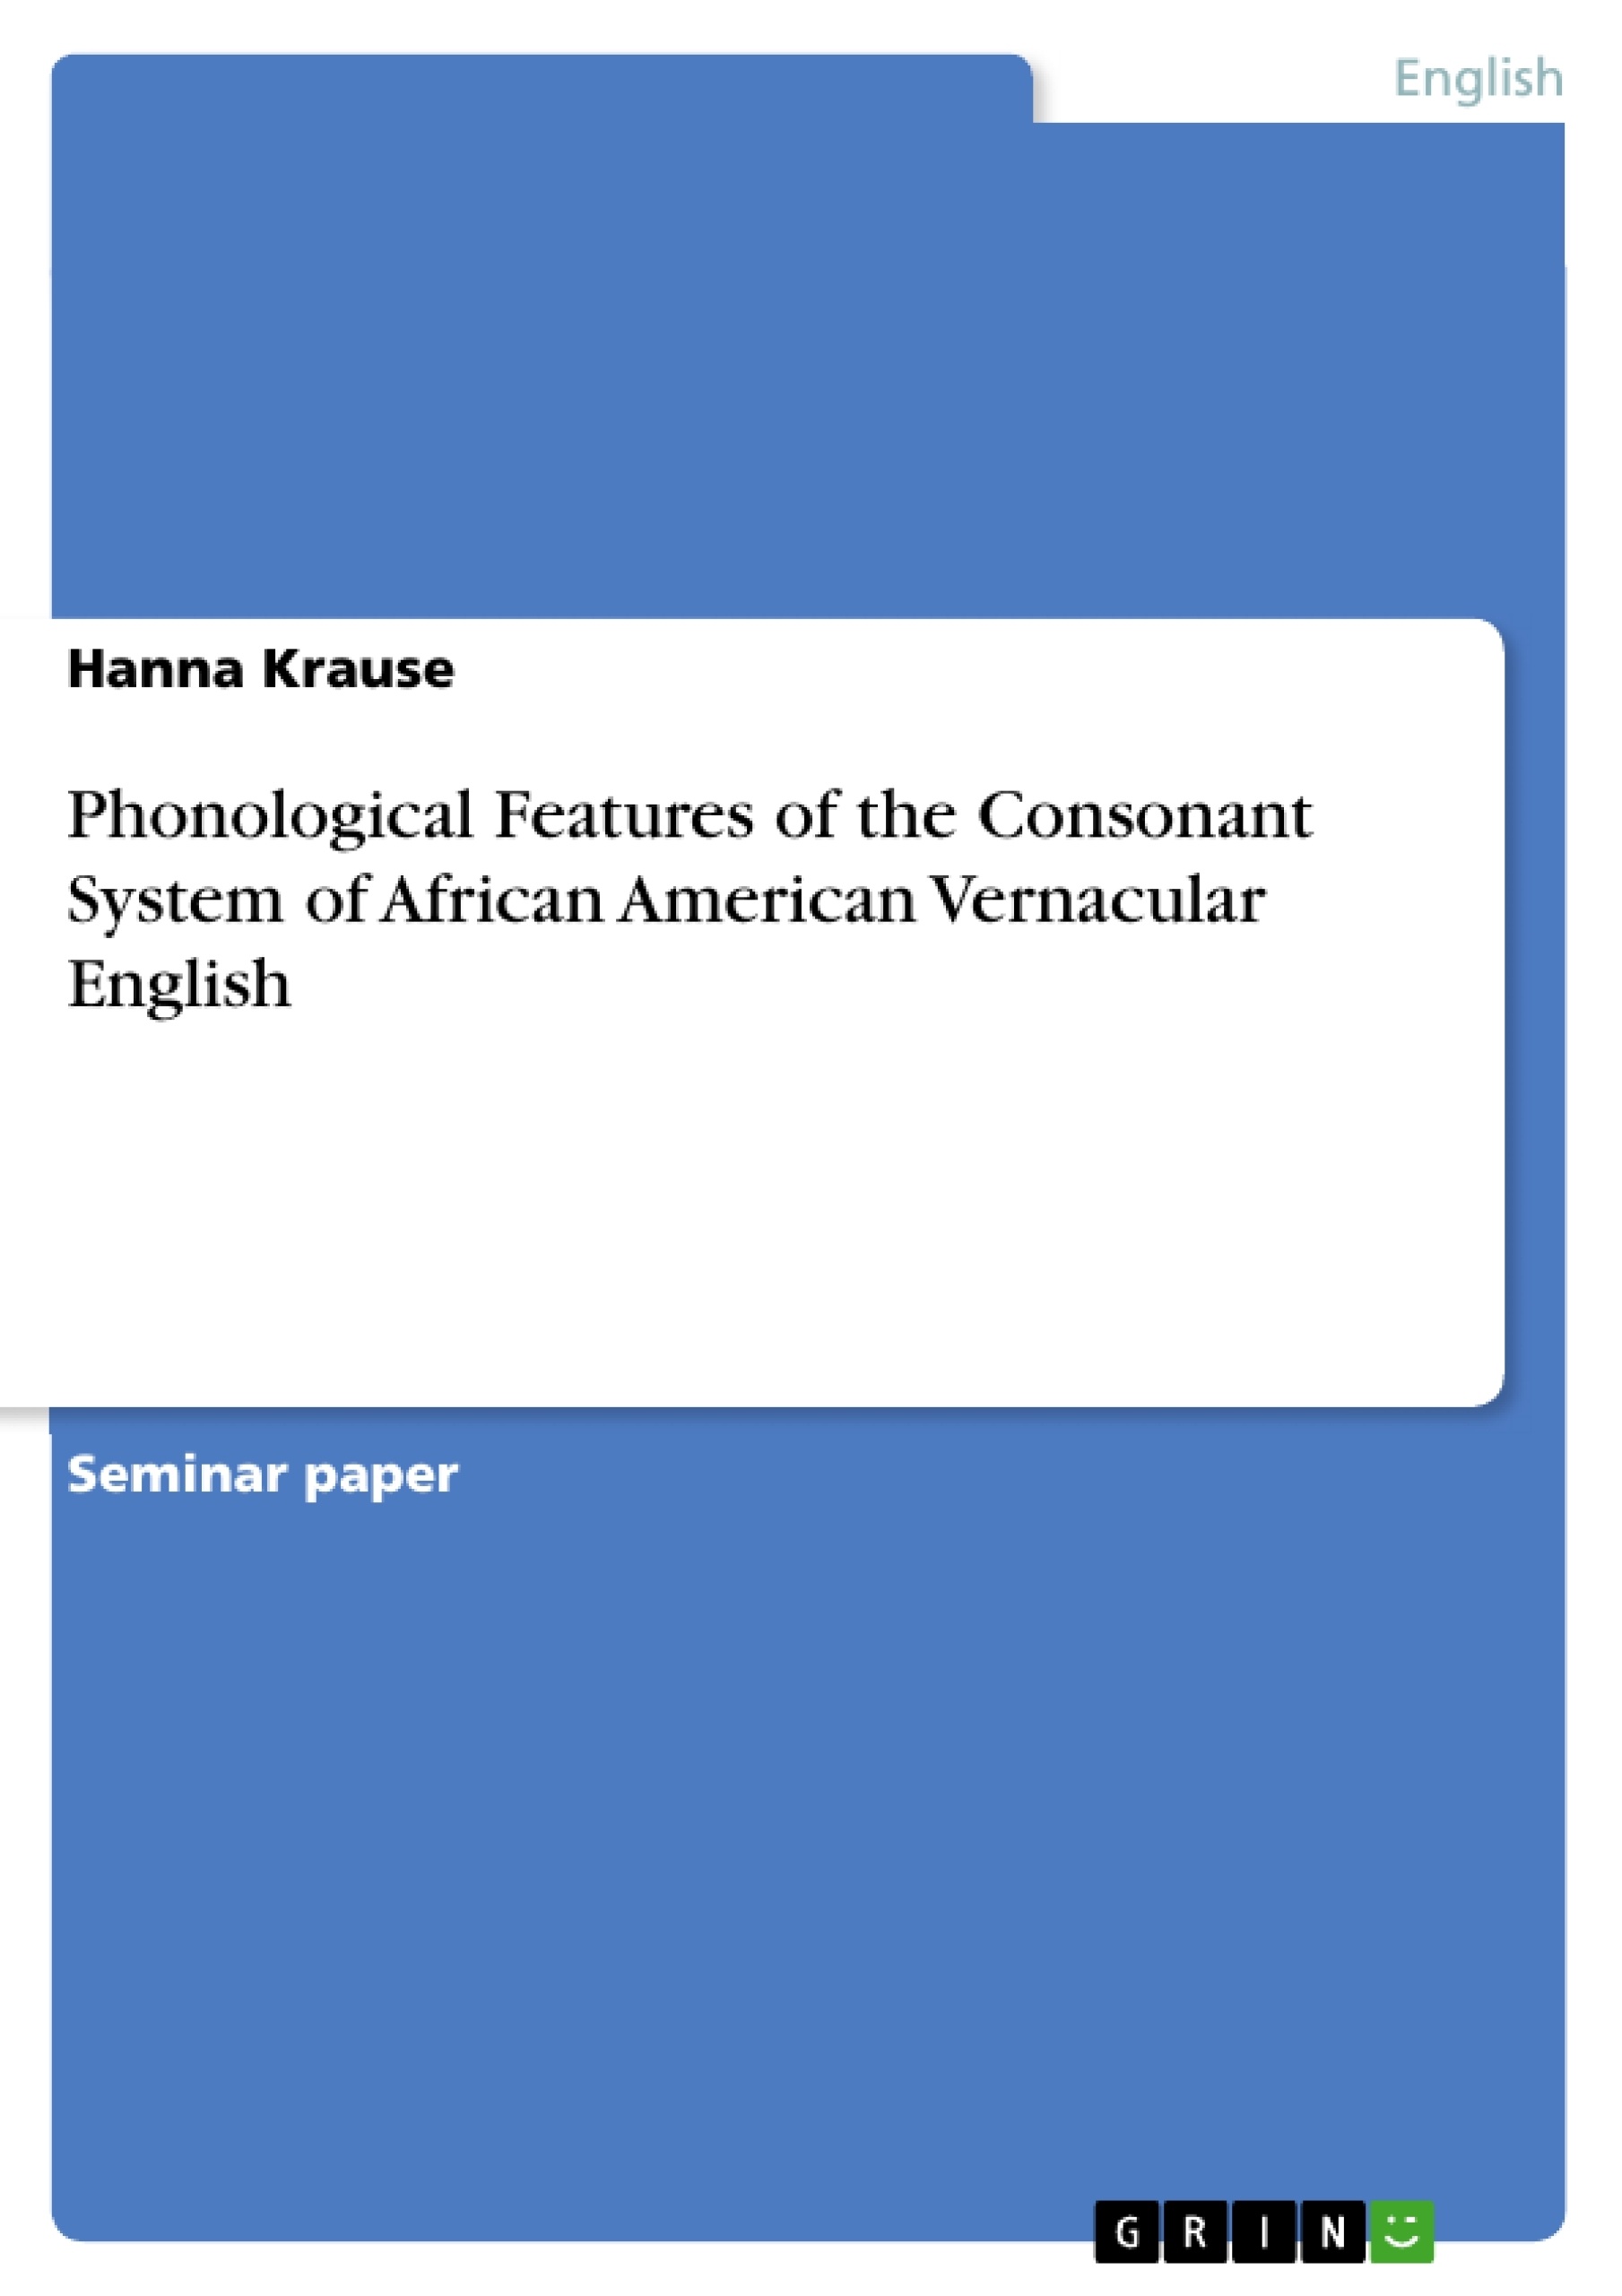 Title: Phonological Features of the Consonant System of African American Vernacular English